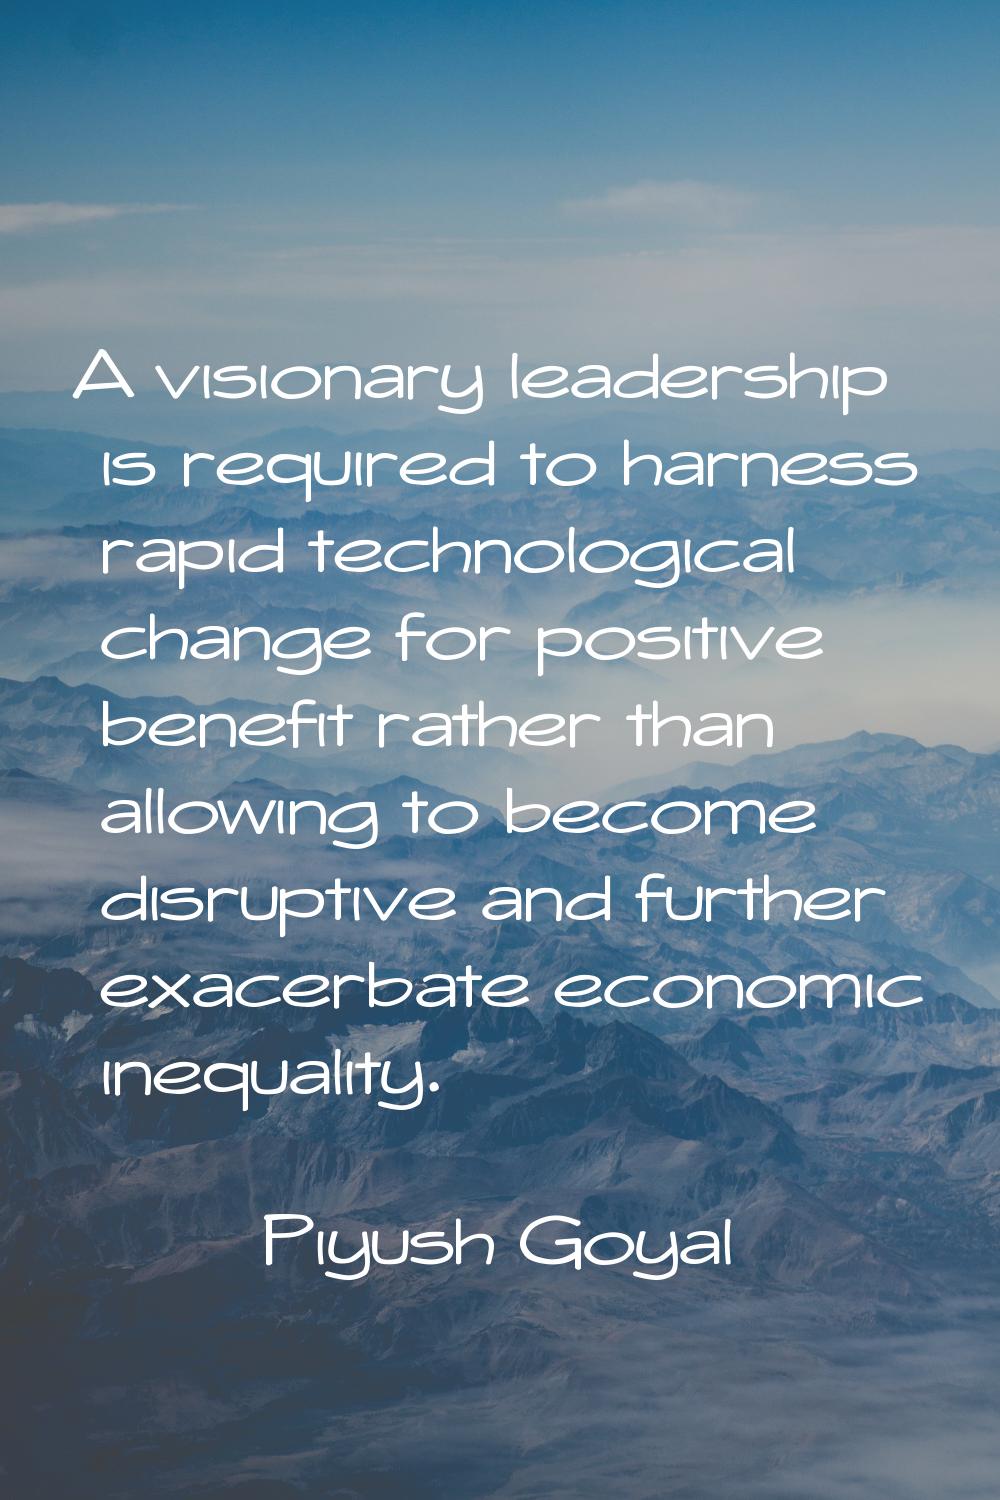 A visionary leadership is required to harness rapid technological change for positive benefit rathe